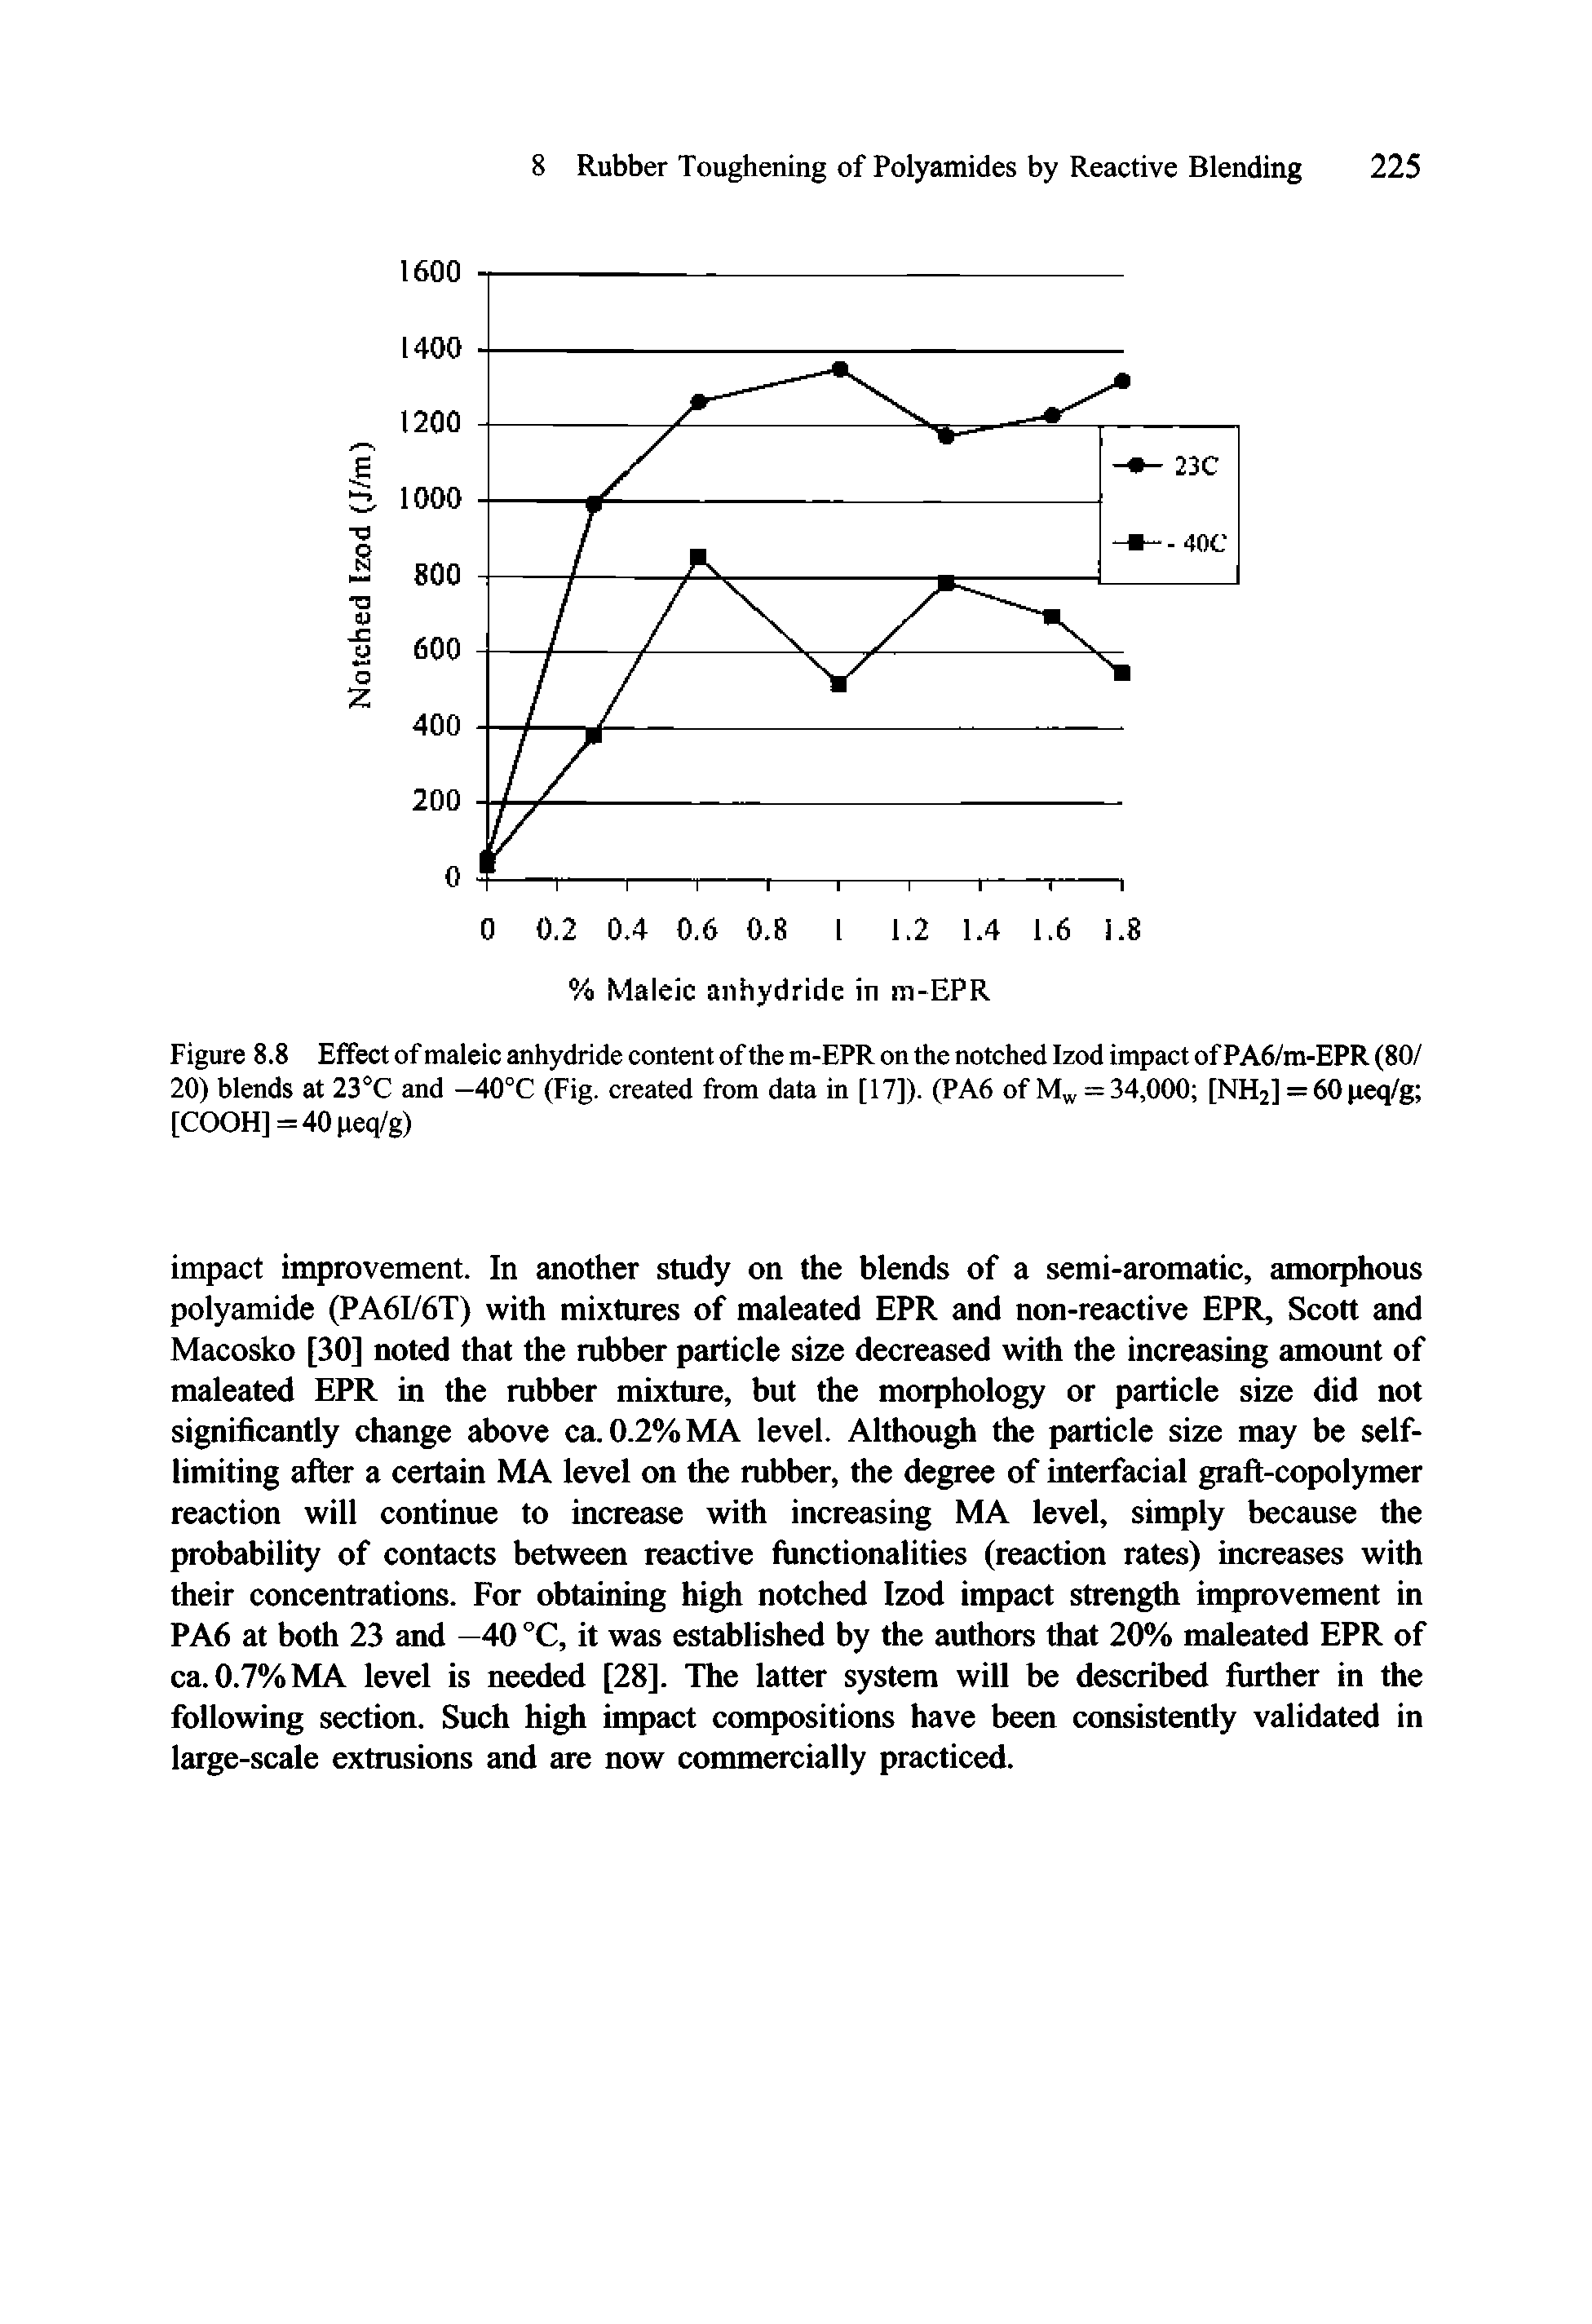 Figure 8.8 Effect of maleic anhydride content of the m-EPR on the notched Izod impact ofPA6/m-EPR (80/ 20) blends at 23°C and —40°C (Fig. created from data in [17]). (PA6 of = 34,000 [NH2] = 60 peq/g [COOH]=40peq/g)...